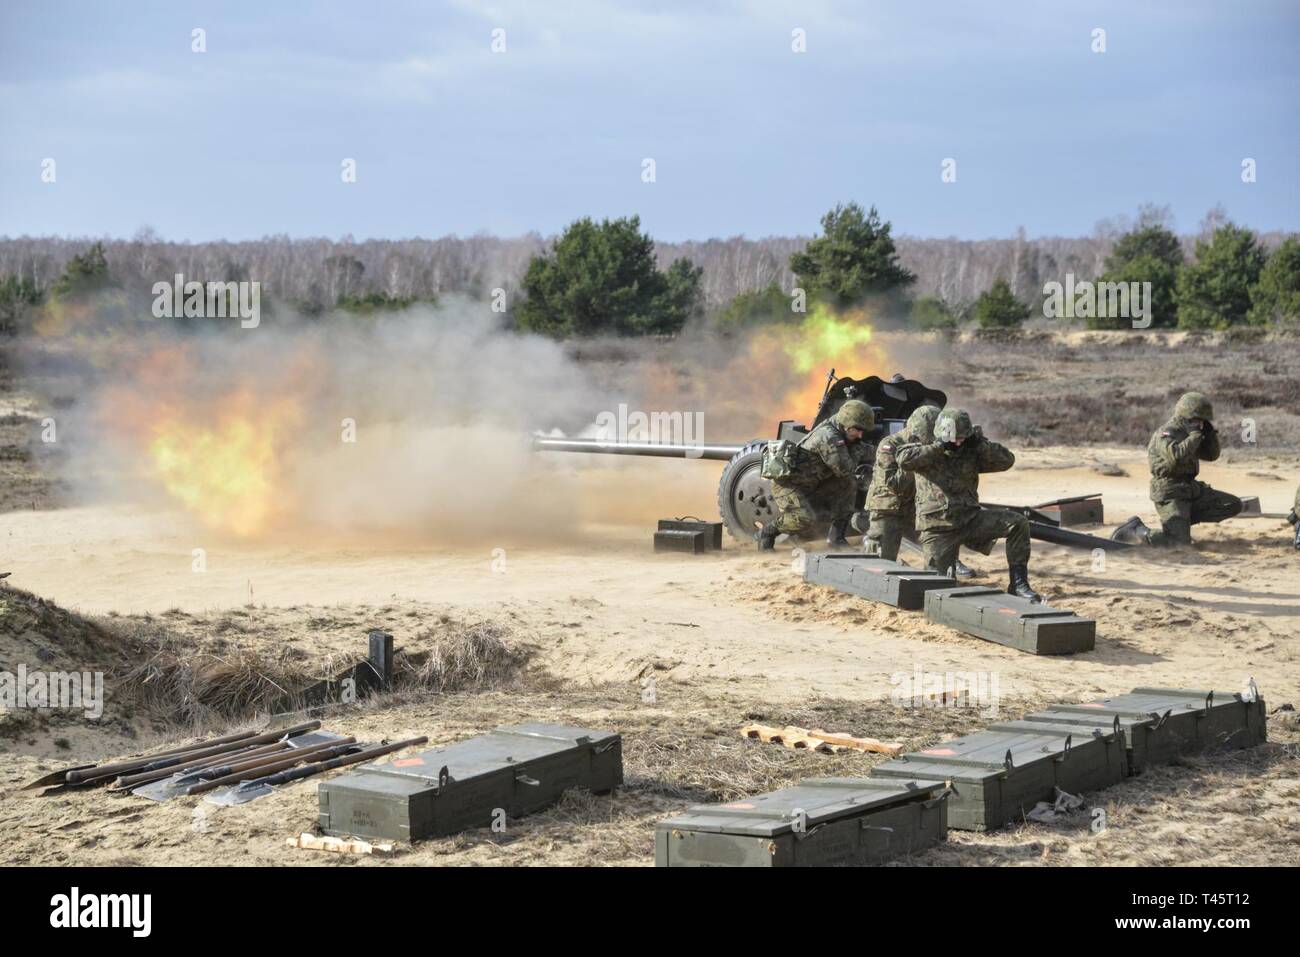 Polish soldiers direct fire a 85 mm D-44 artillery cannon during exercise  Dynamic Front 19 at Torun, Poland, March 8, 2019. Exercise Dynamic Front 19  includes approximately 3,200 service members from 27